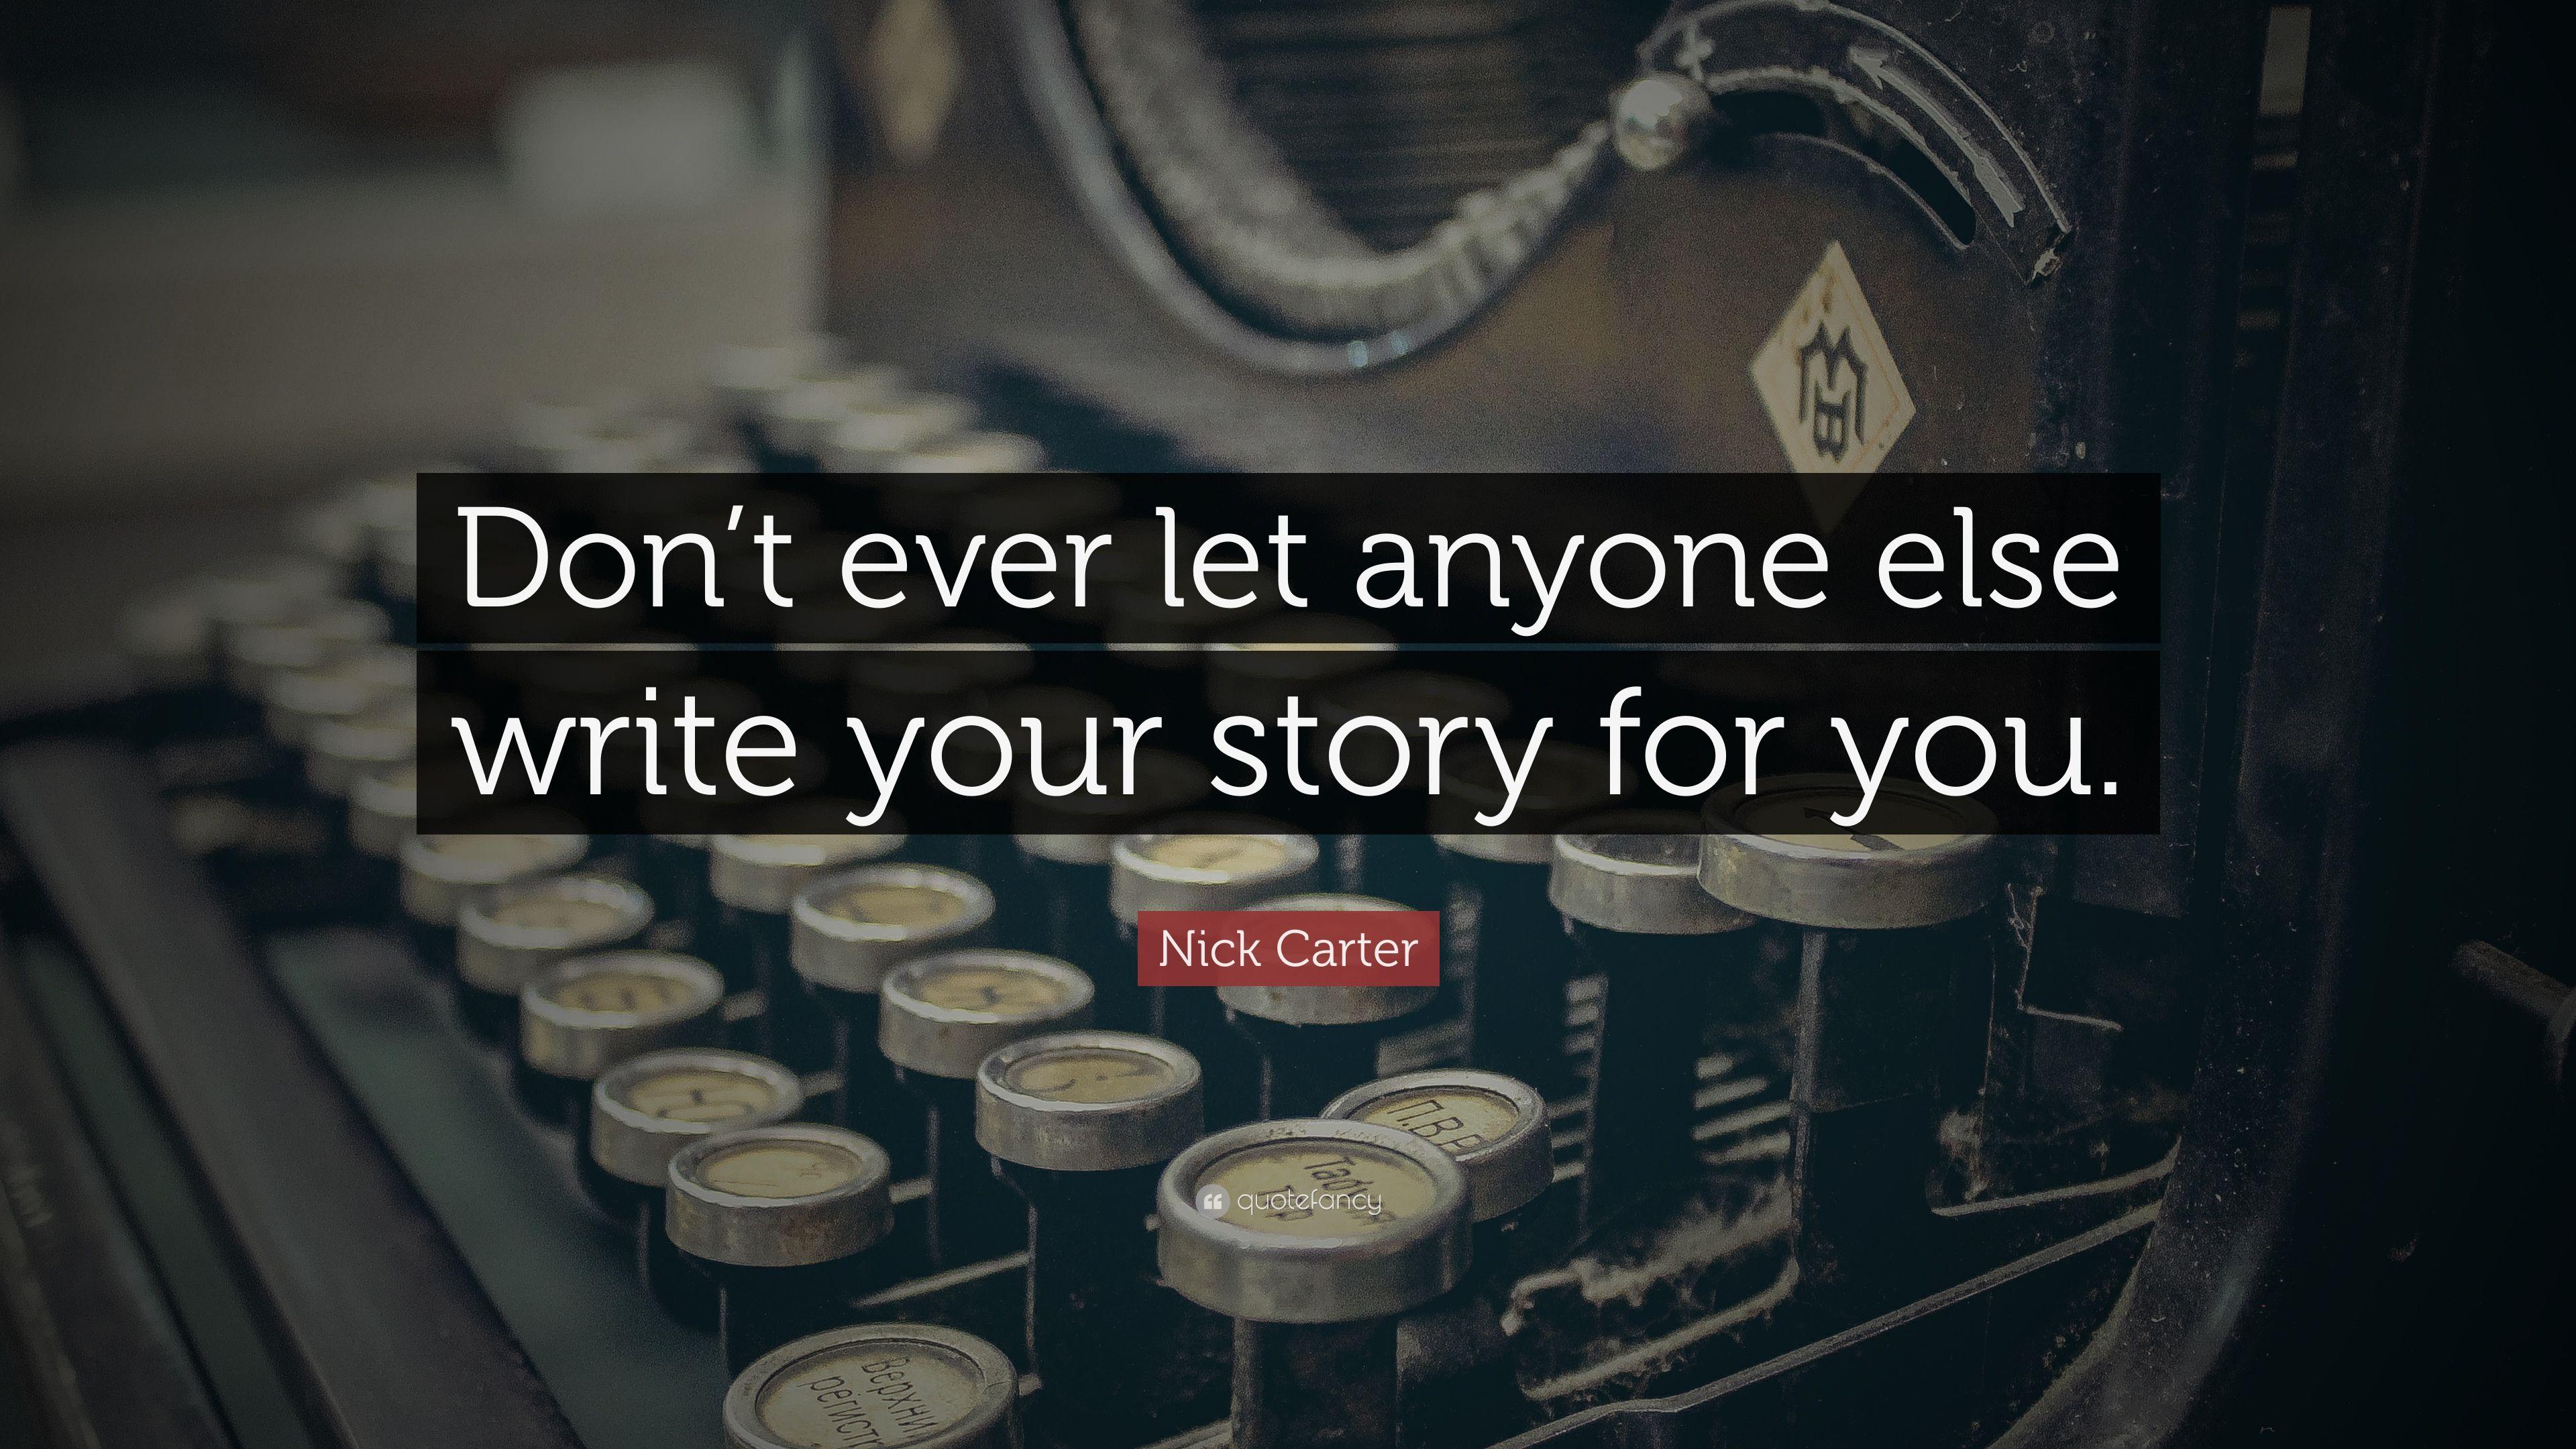 Nick Carter Quote: “Don't ever let anyone else write your story